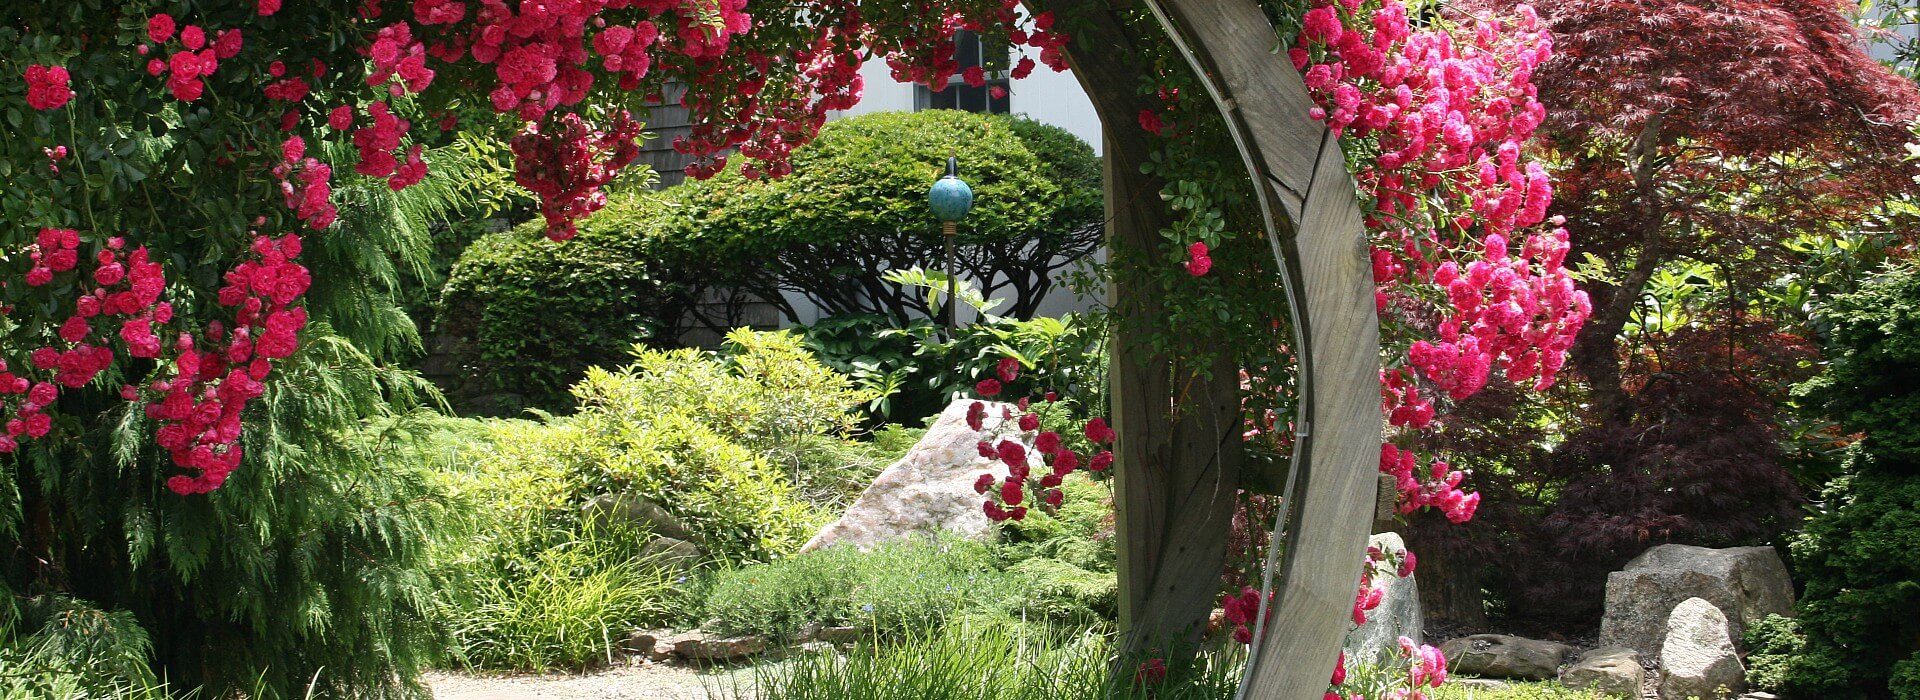 Wooden circular arch covered with gorgeous pink flowers surrounded by lush green landscaping